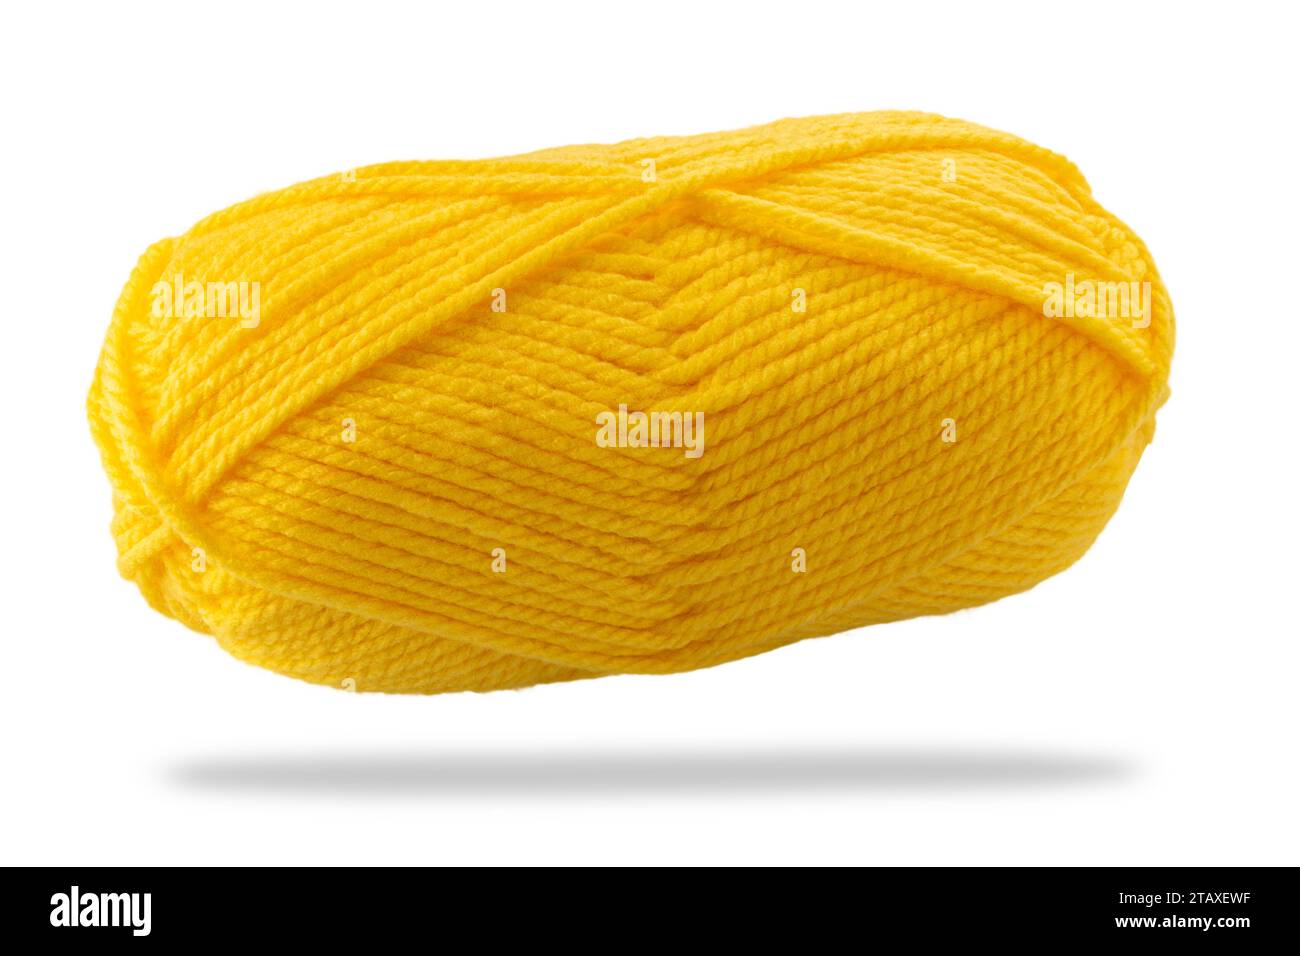 Ball of yellow-colored wool yarn isolated on white with clipping path included Stock Photo